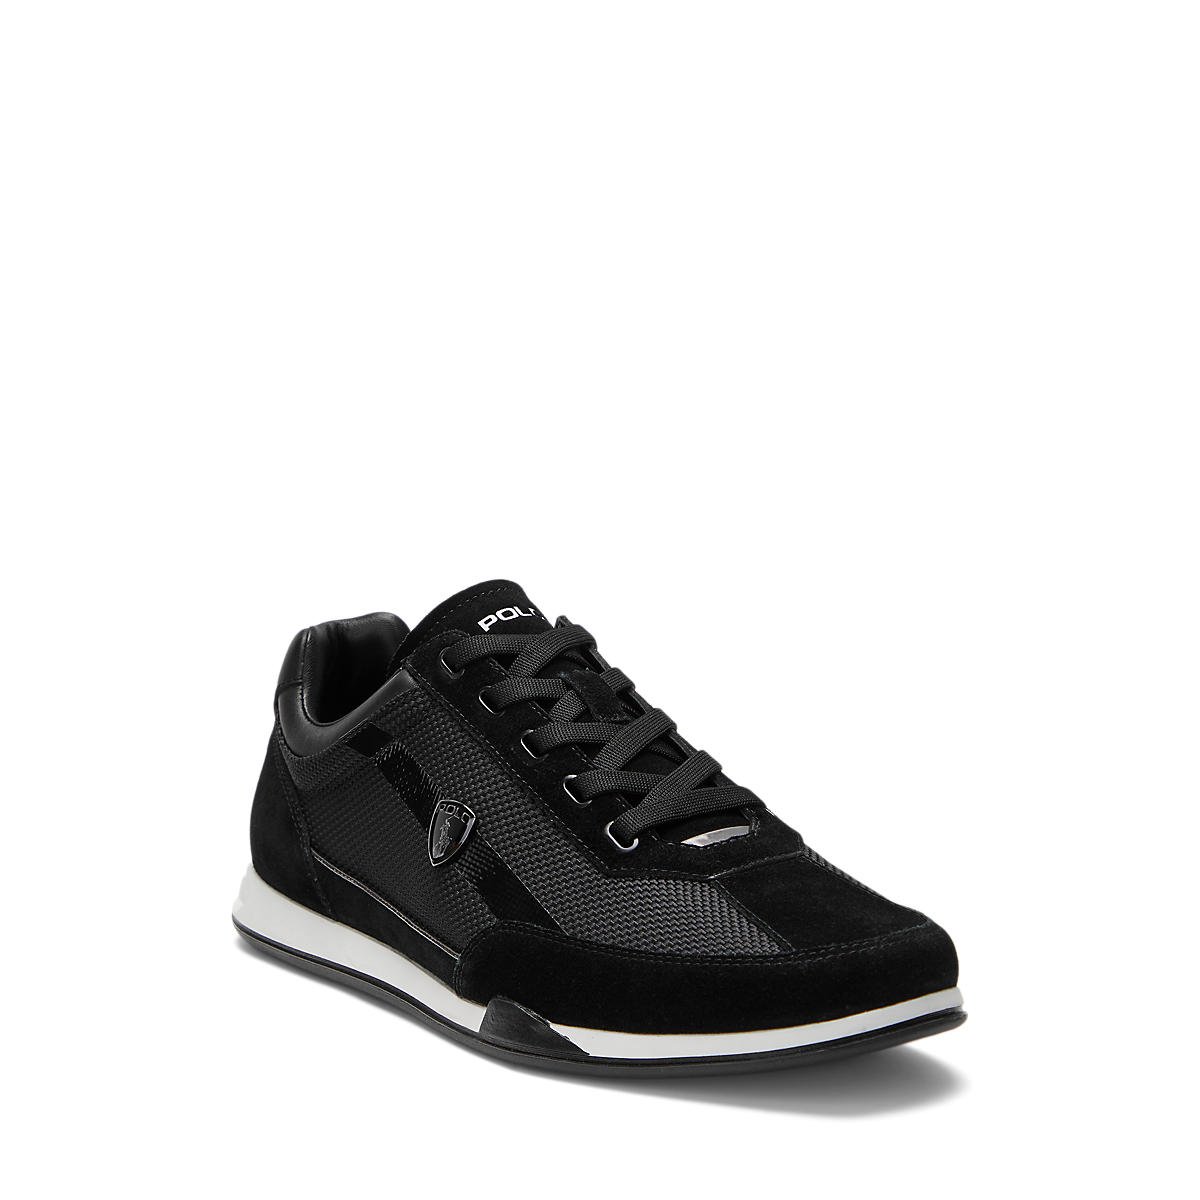 809878002002 Polo Ralph Lauren Irvine Sneakers Low Top Lace Black, P6,545 from P9,350.jpeg